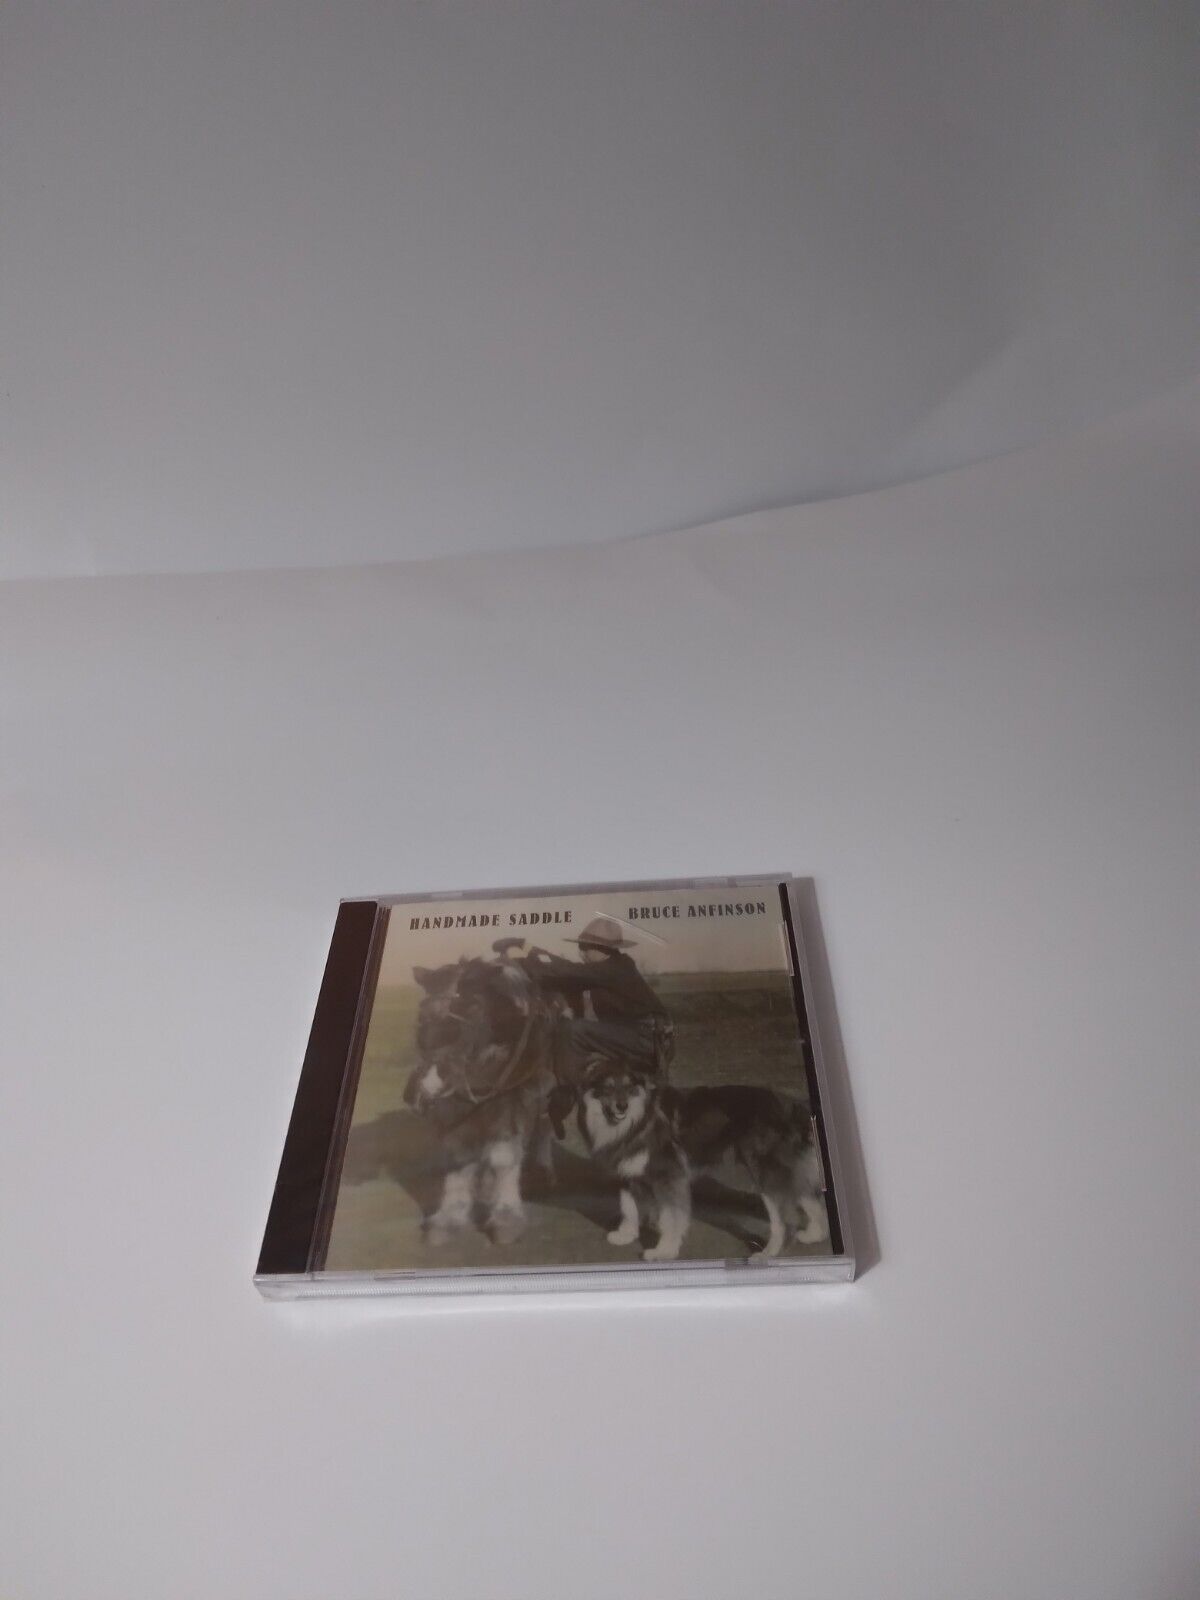 Handmade Saddle by Bruce Anfinson (CD, 1999) Brand New Sealed